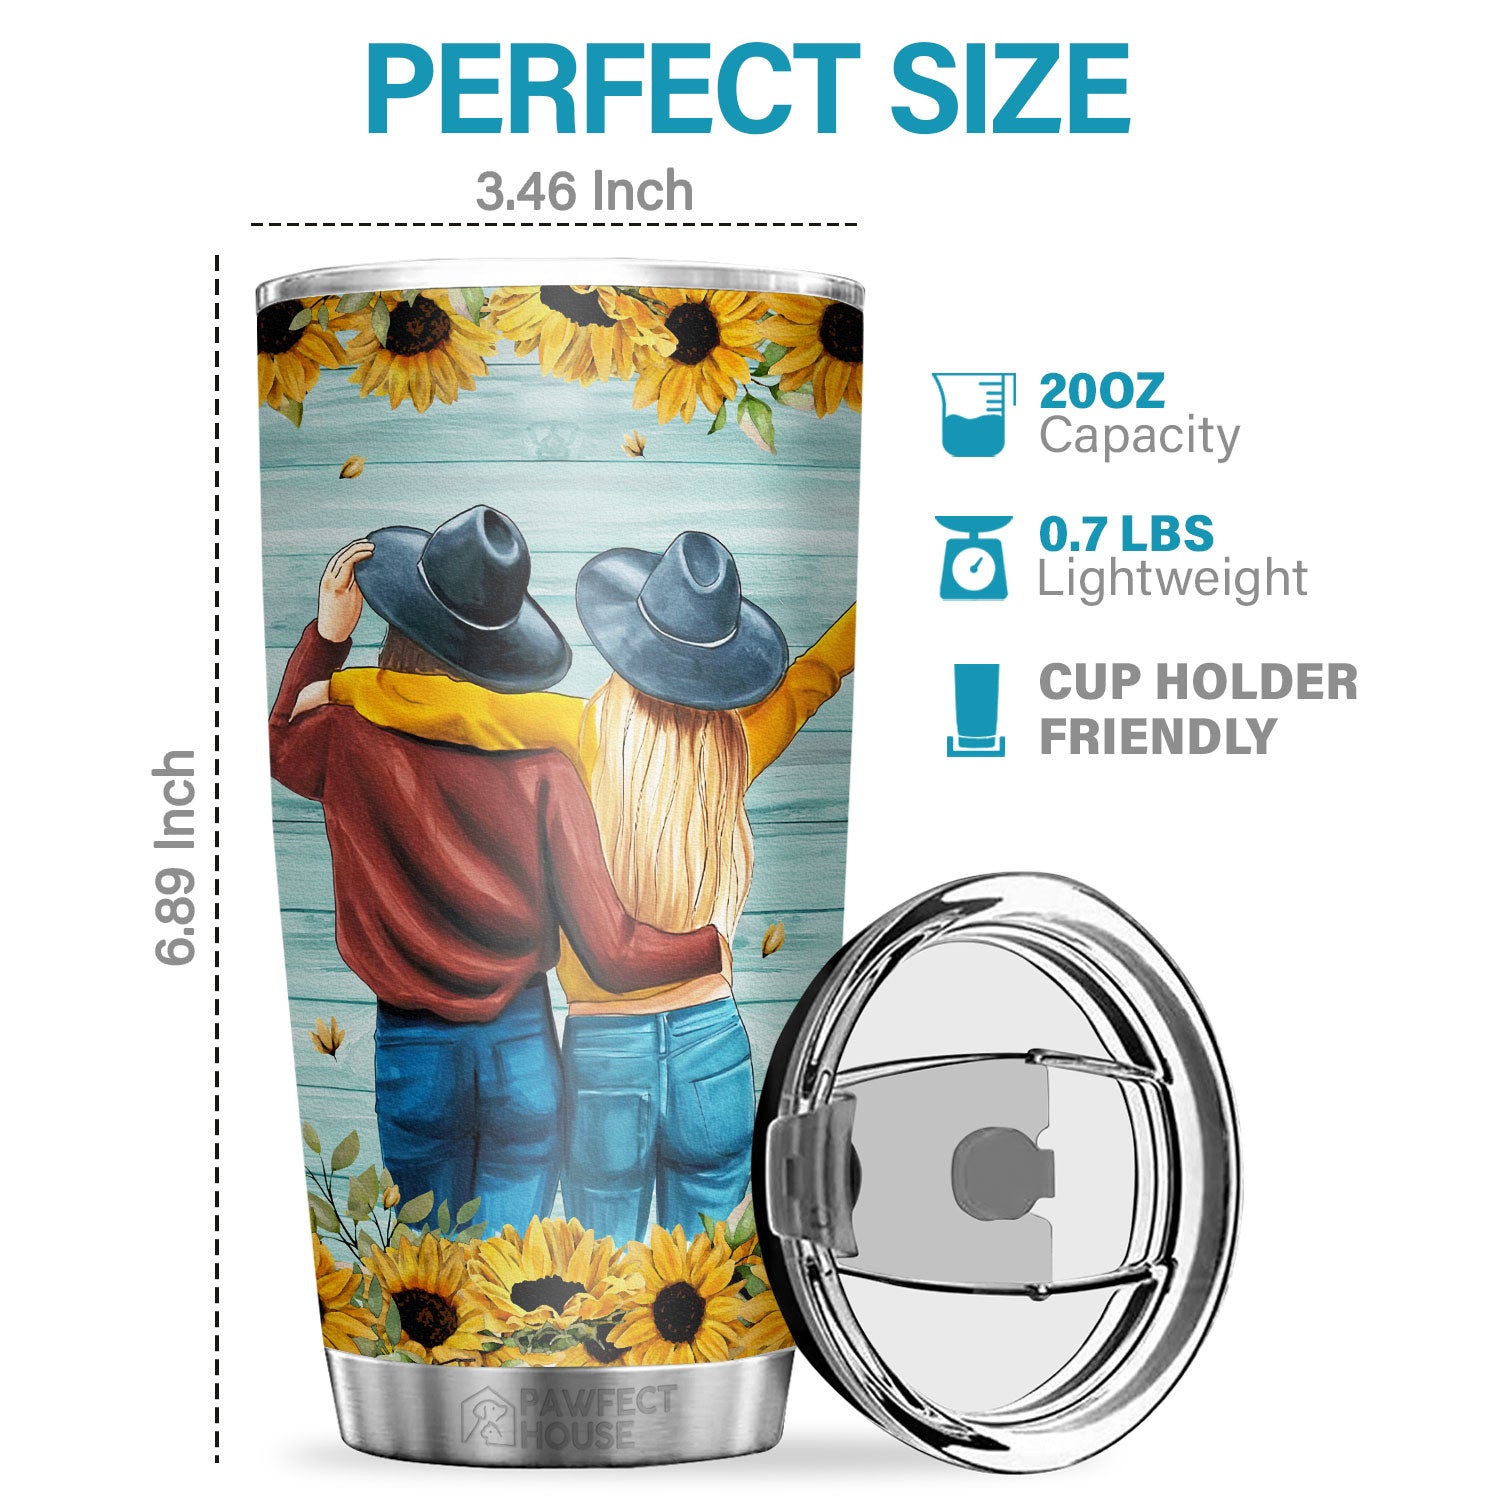 Pawfect House 20oz Tumbler - Thank You For Standing By My Side - Stain